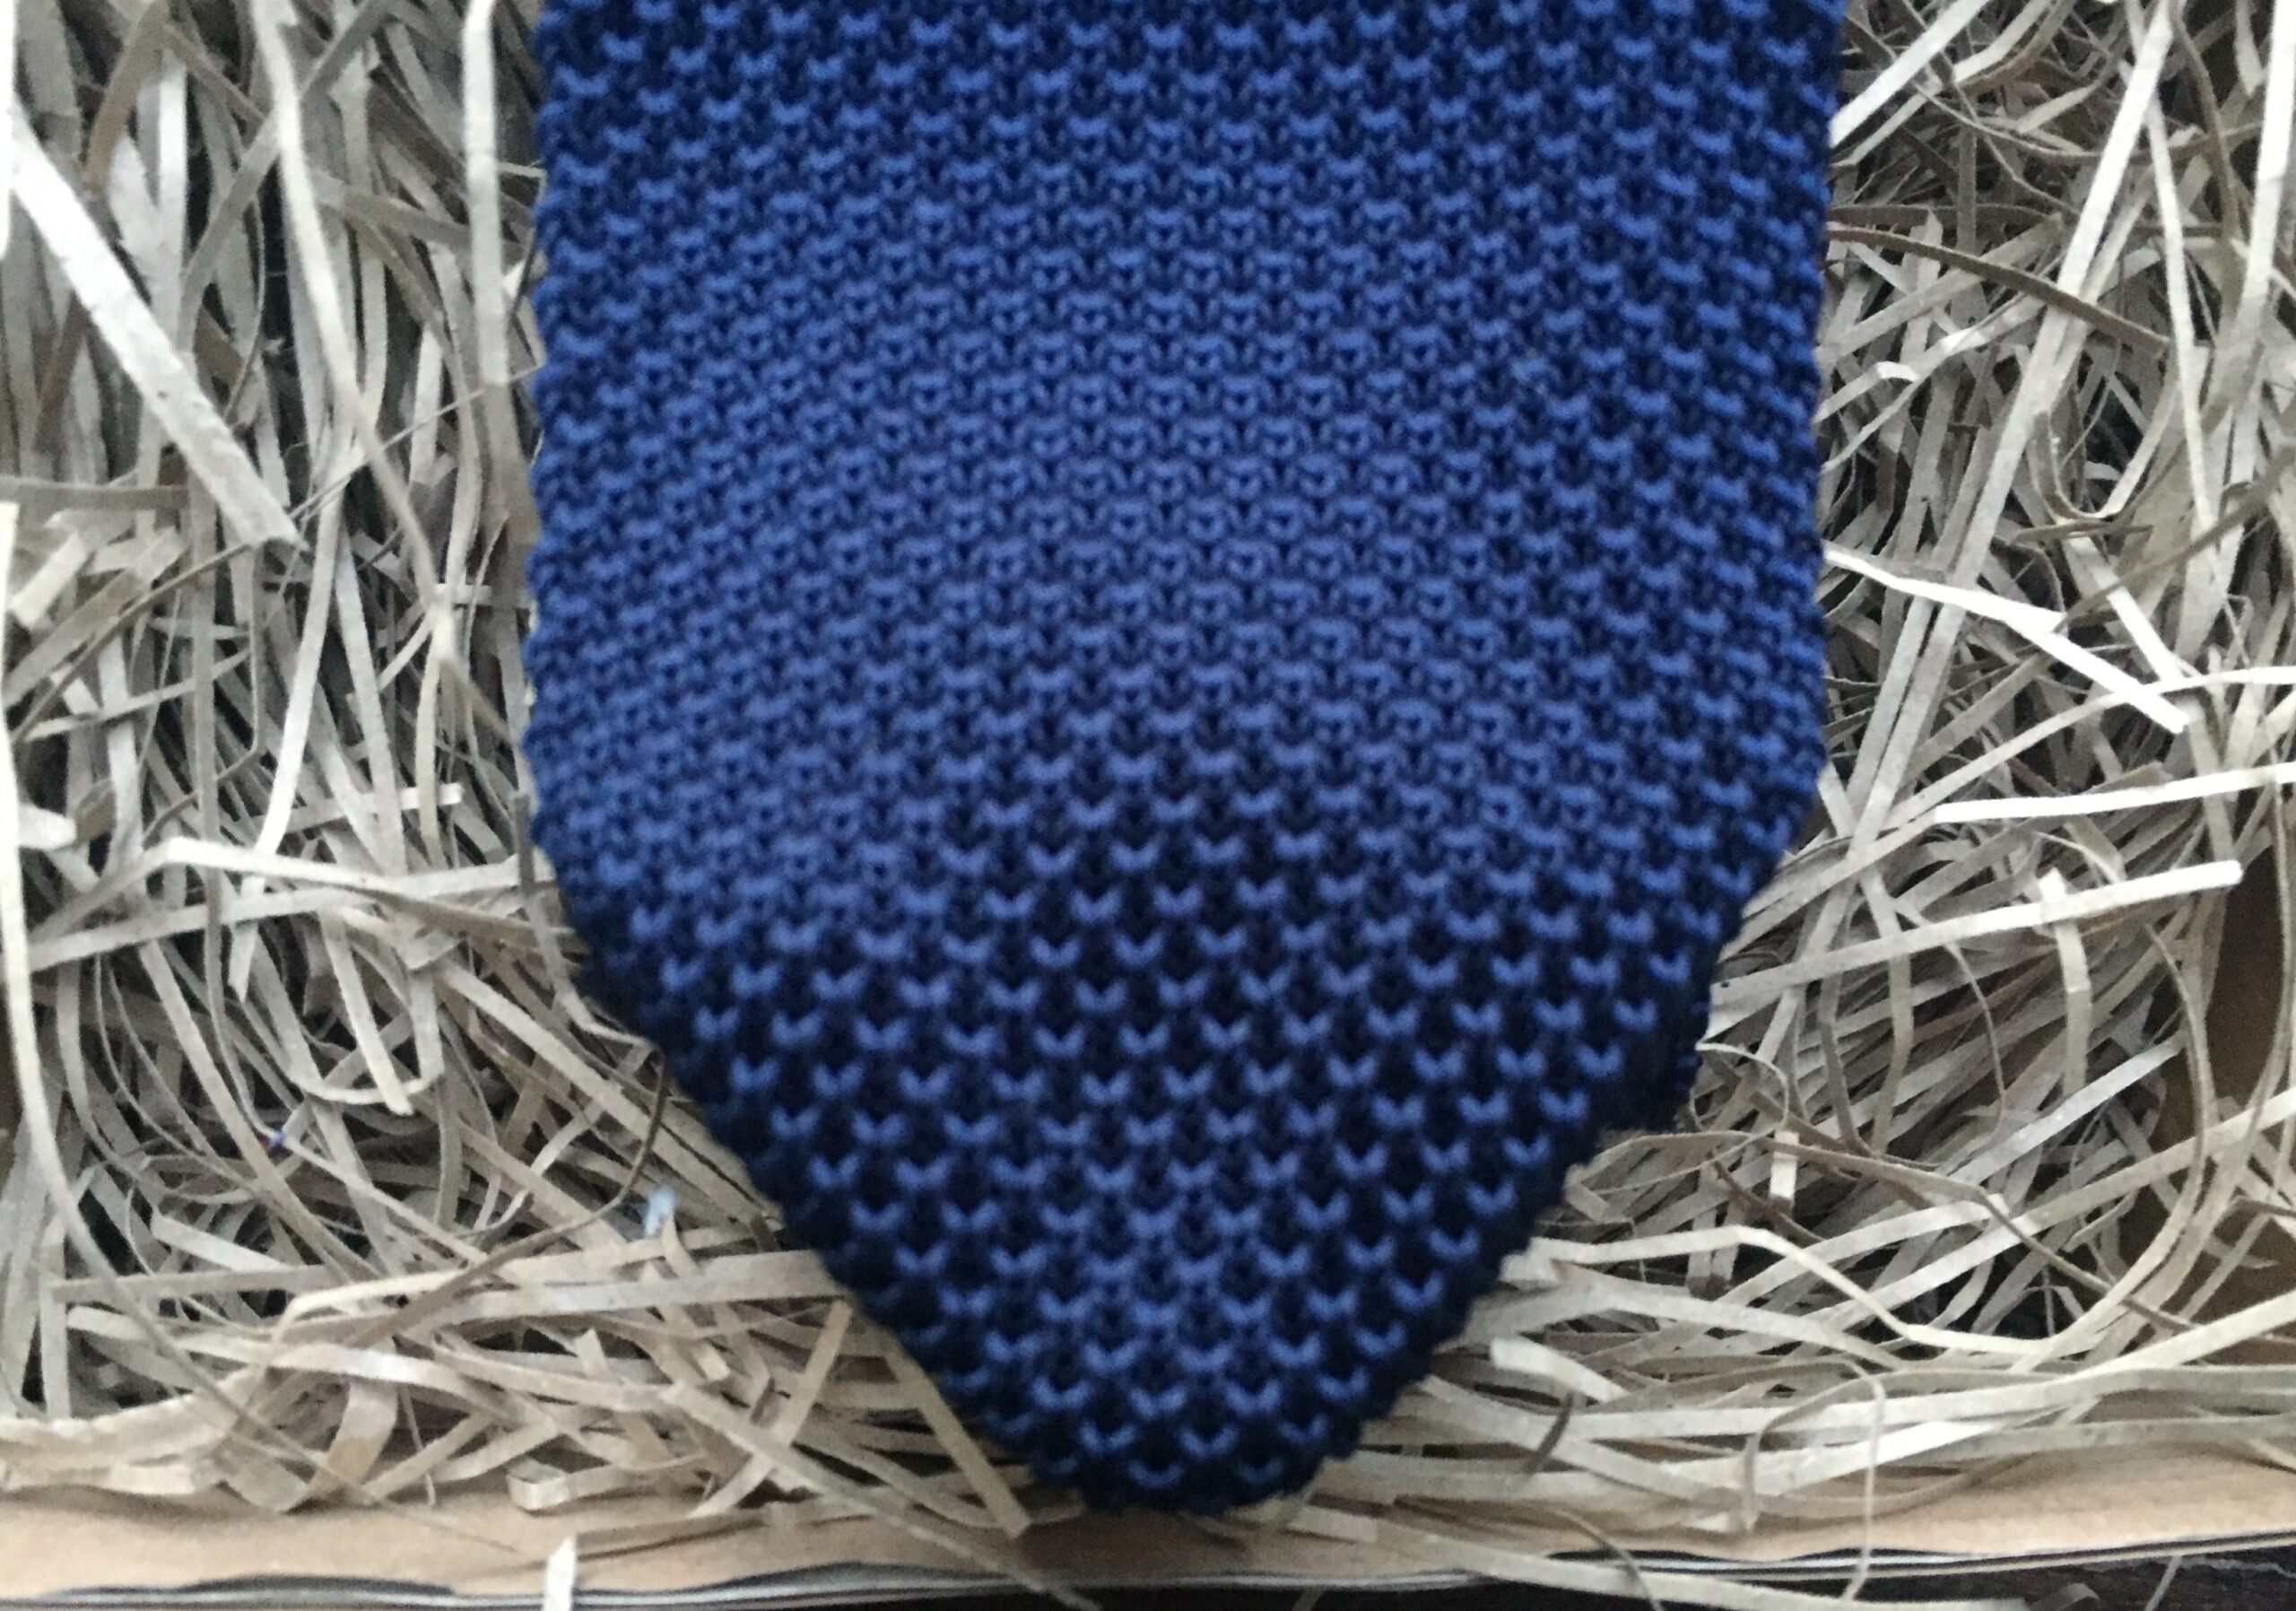 The Larkspur Navy Knitted Tie Set